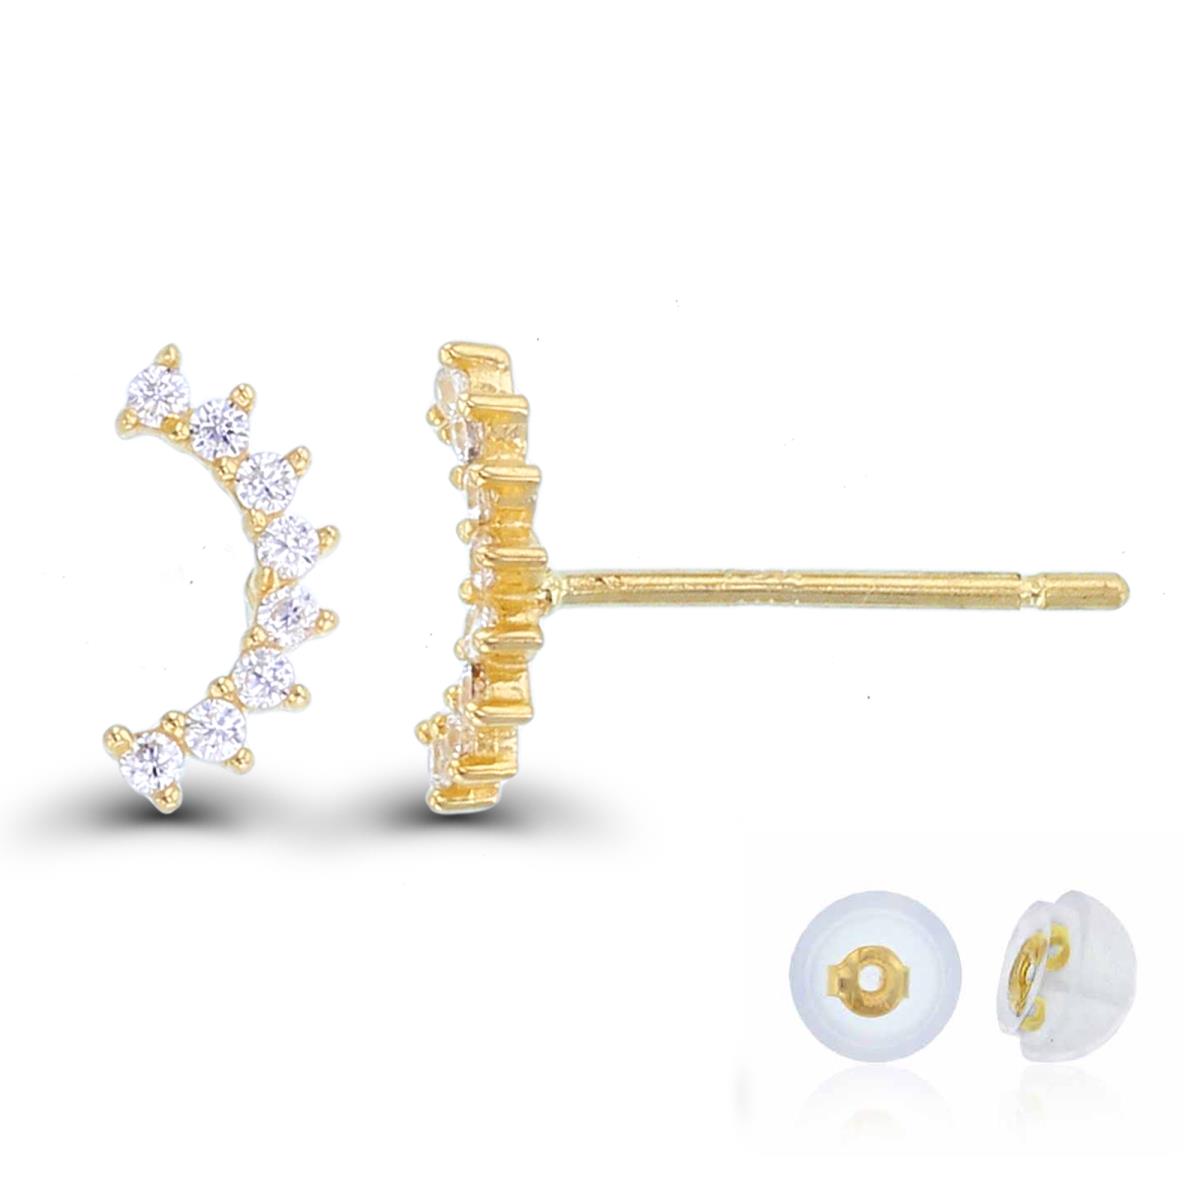 14K Yellow Gold Rnd CZ Crescent Moon Studs with Silicon Backs